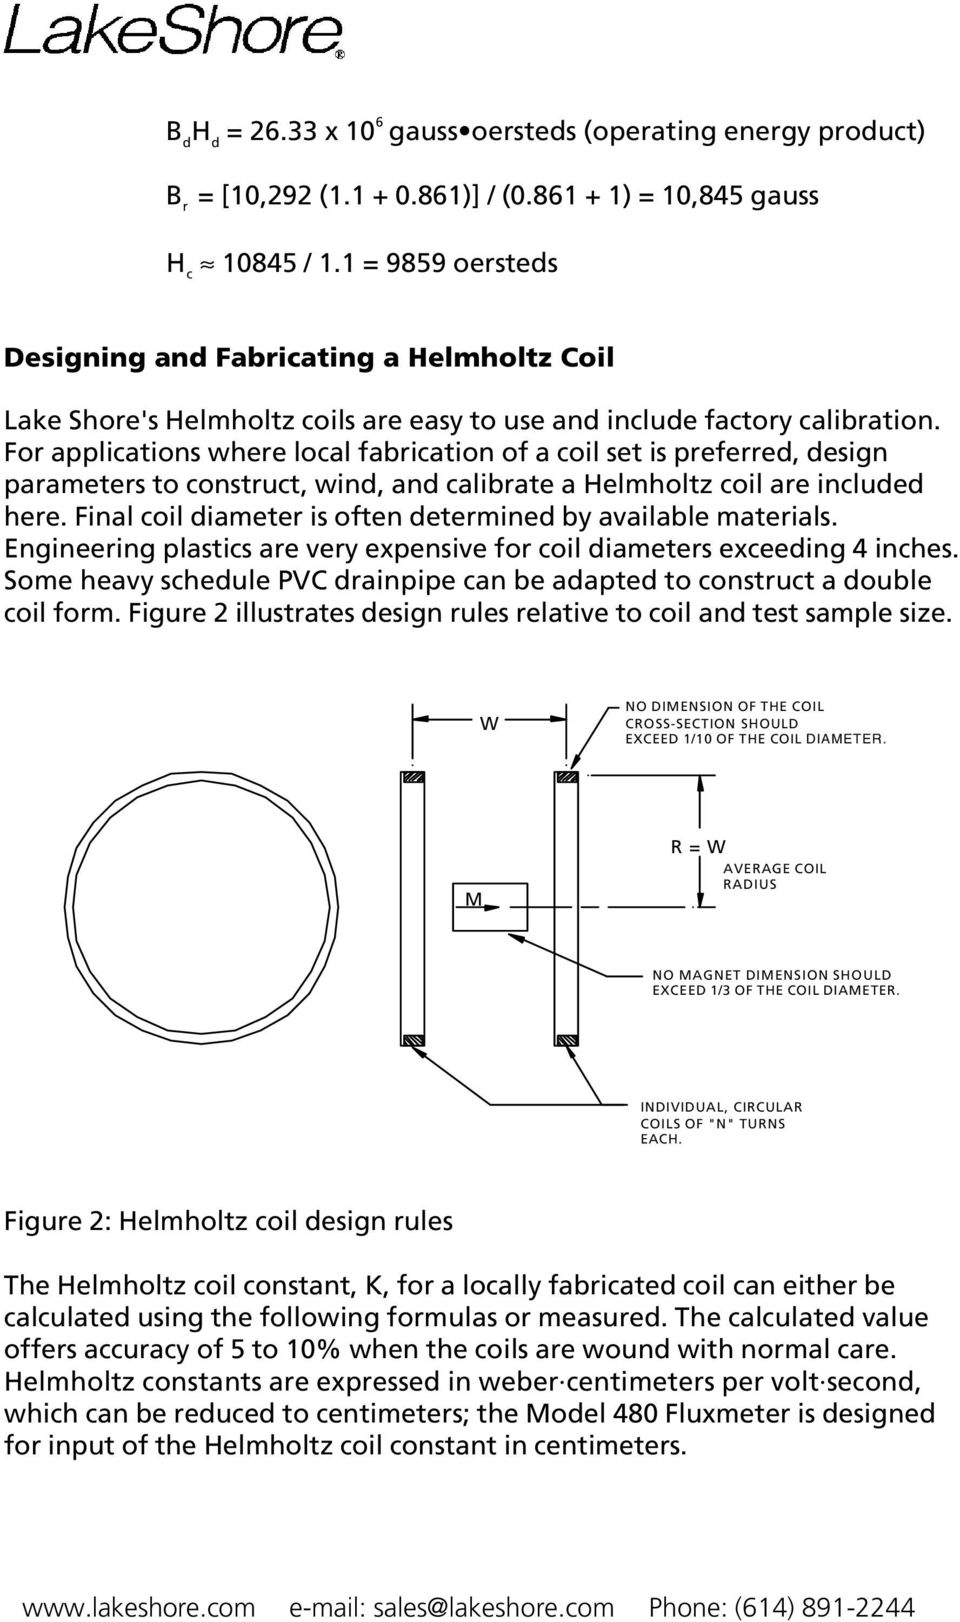 For applications where local fabrication of a coil set is preferred, design parameters to construct, wind, and calibrate a Helmholtz coil are included here.